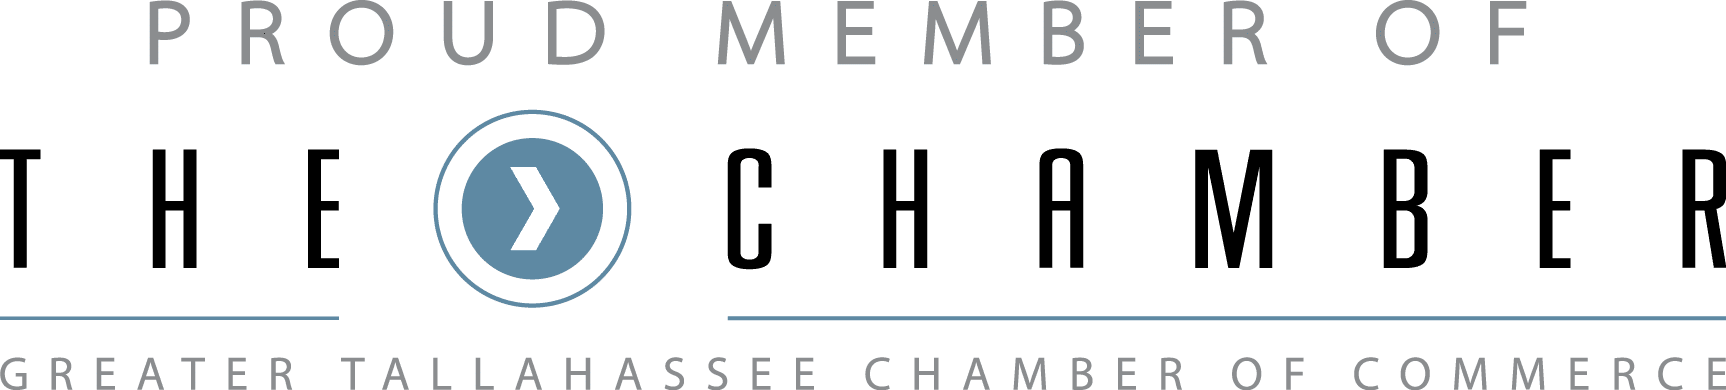 Tallahassee Chamber of Commerce logo